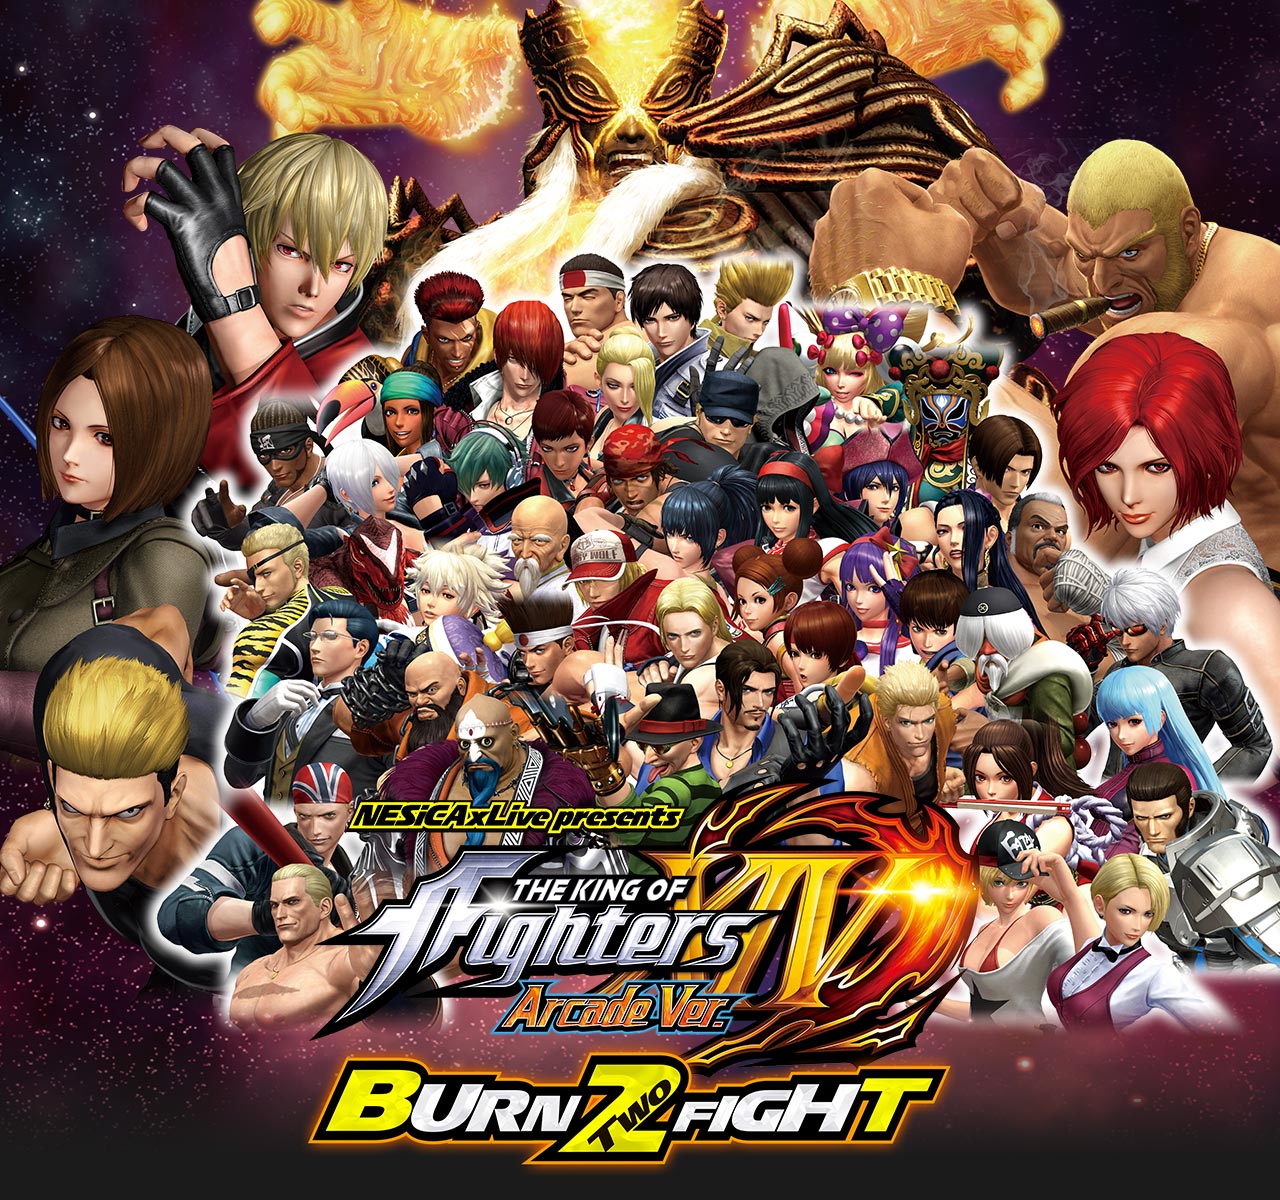 NESiCAxLive presents『THE KING OF FIGHTERS XIV Arcade Ver. BURN TWO FIGHT2018』